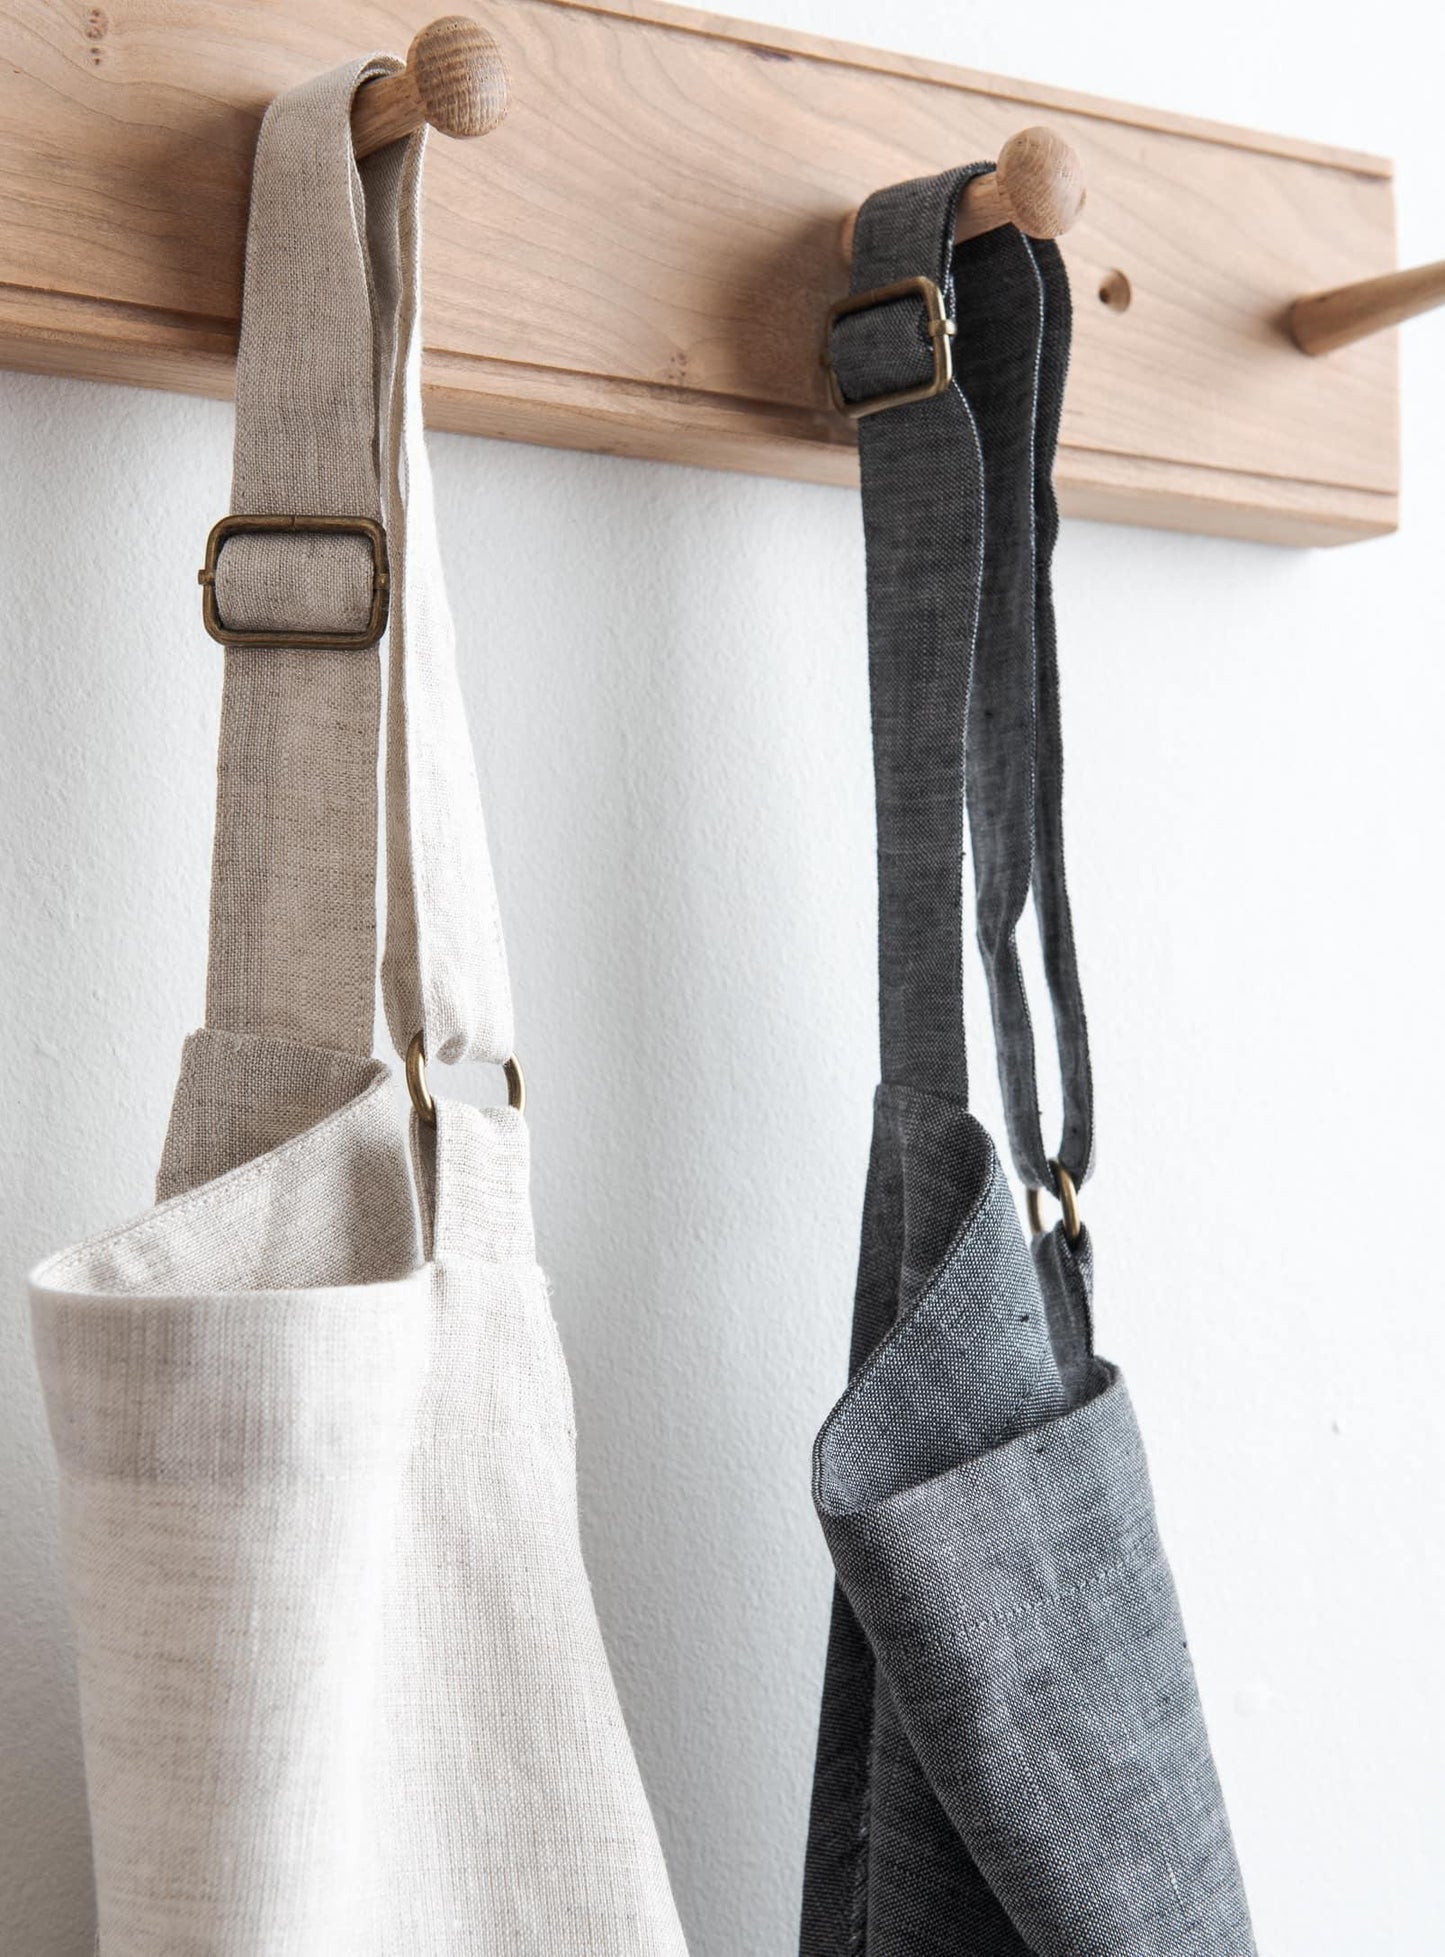 detailed view of two kitchen aprons hanging on a wooden peg rail